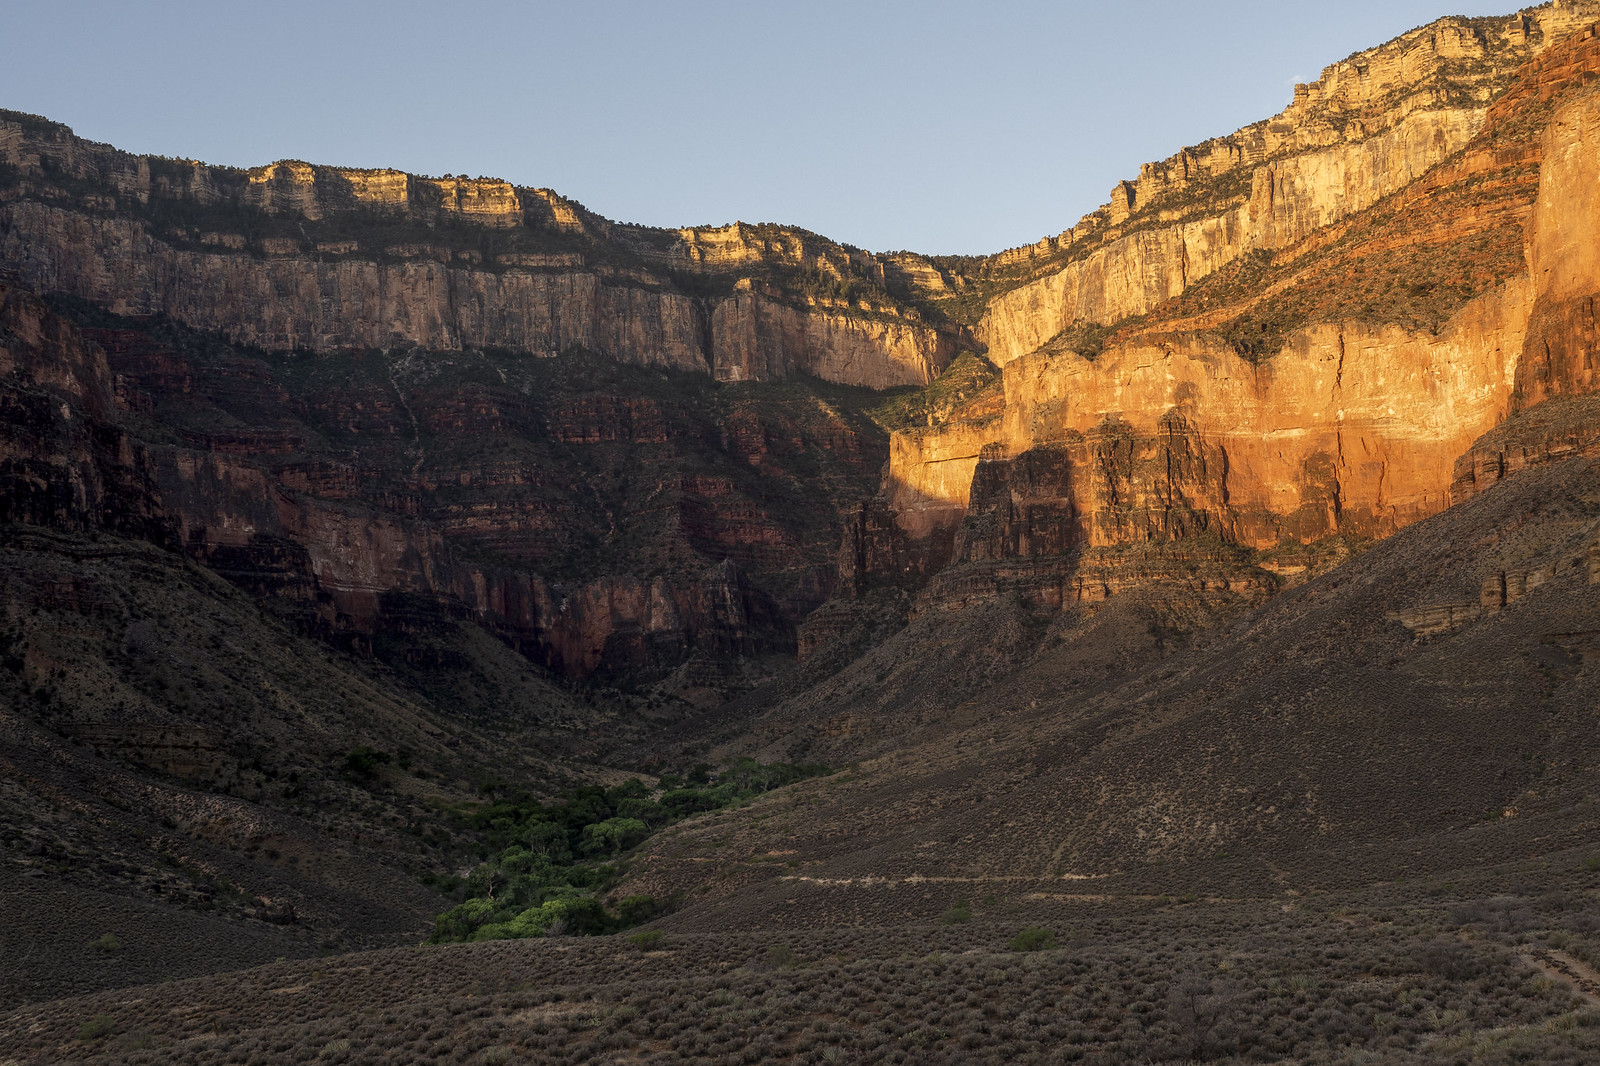 Sunrise in the Canyon